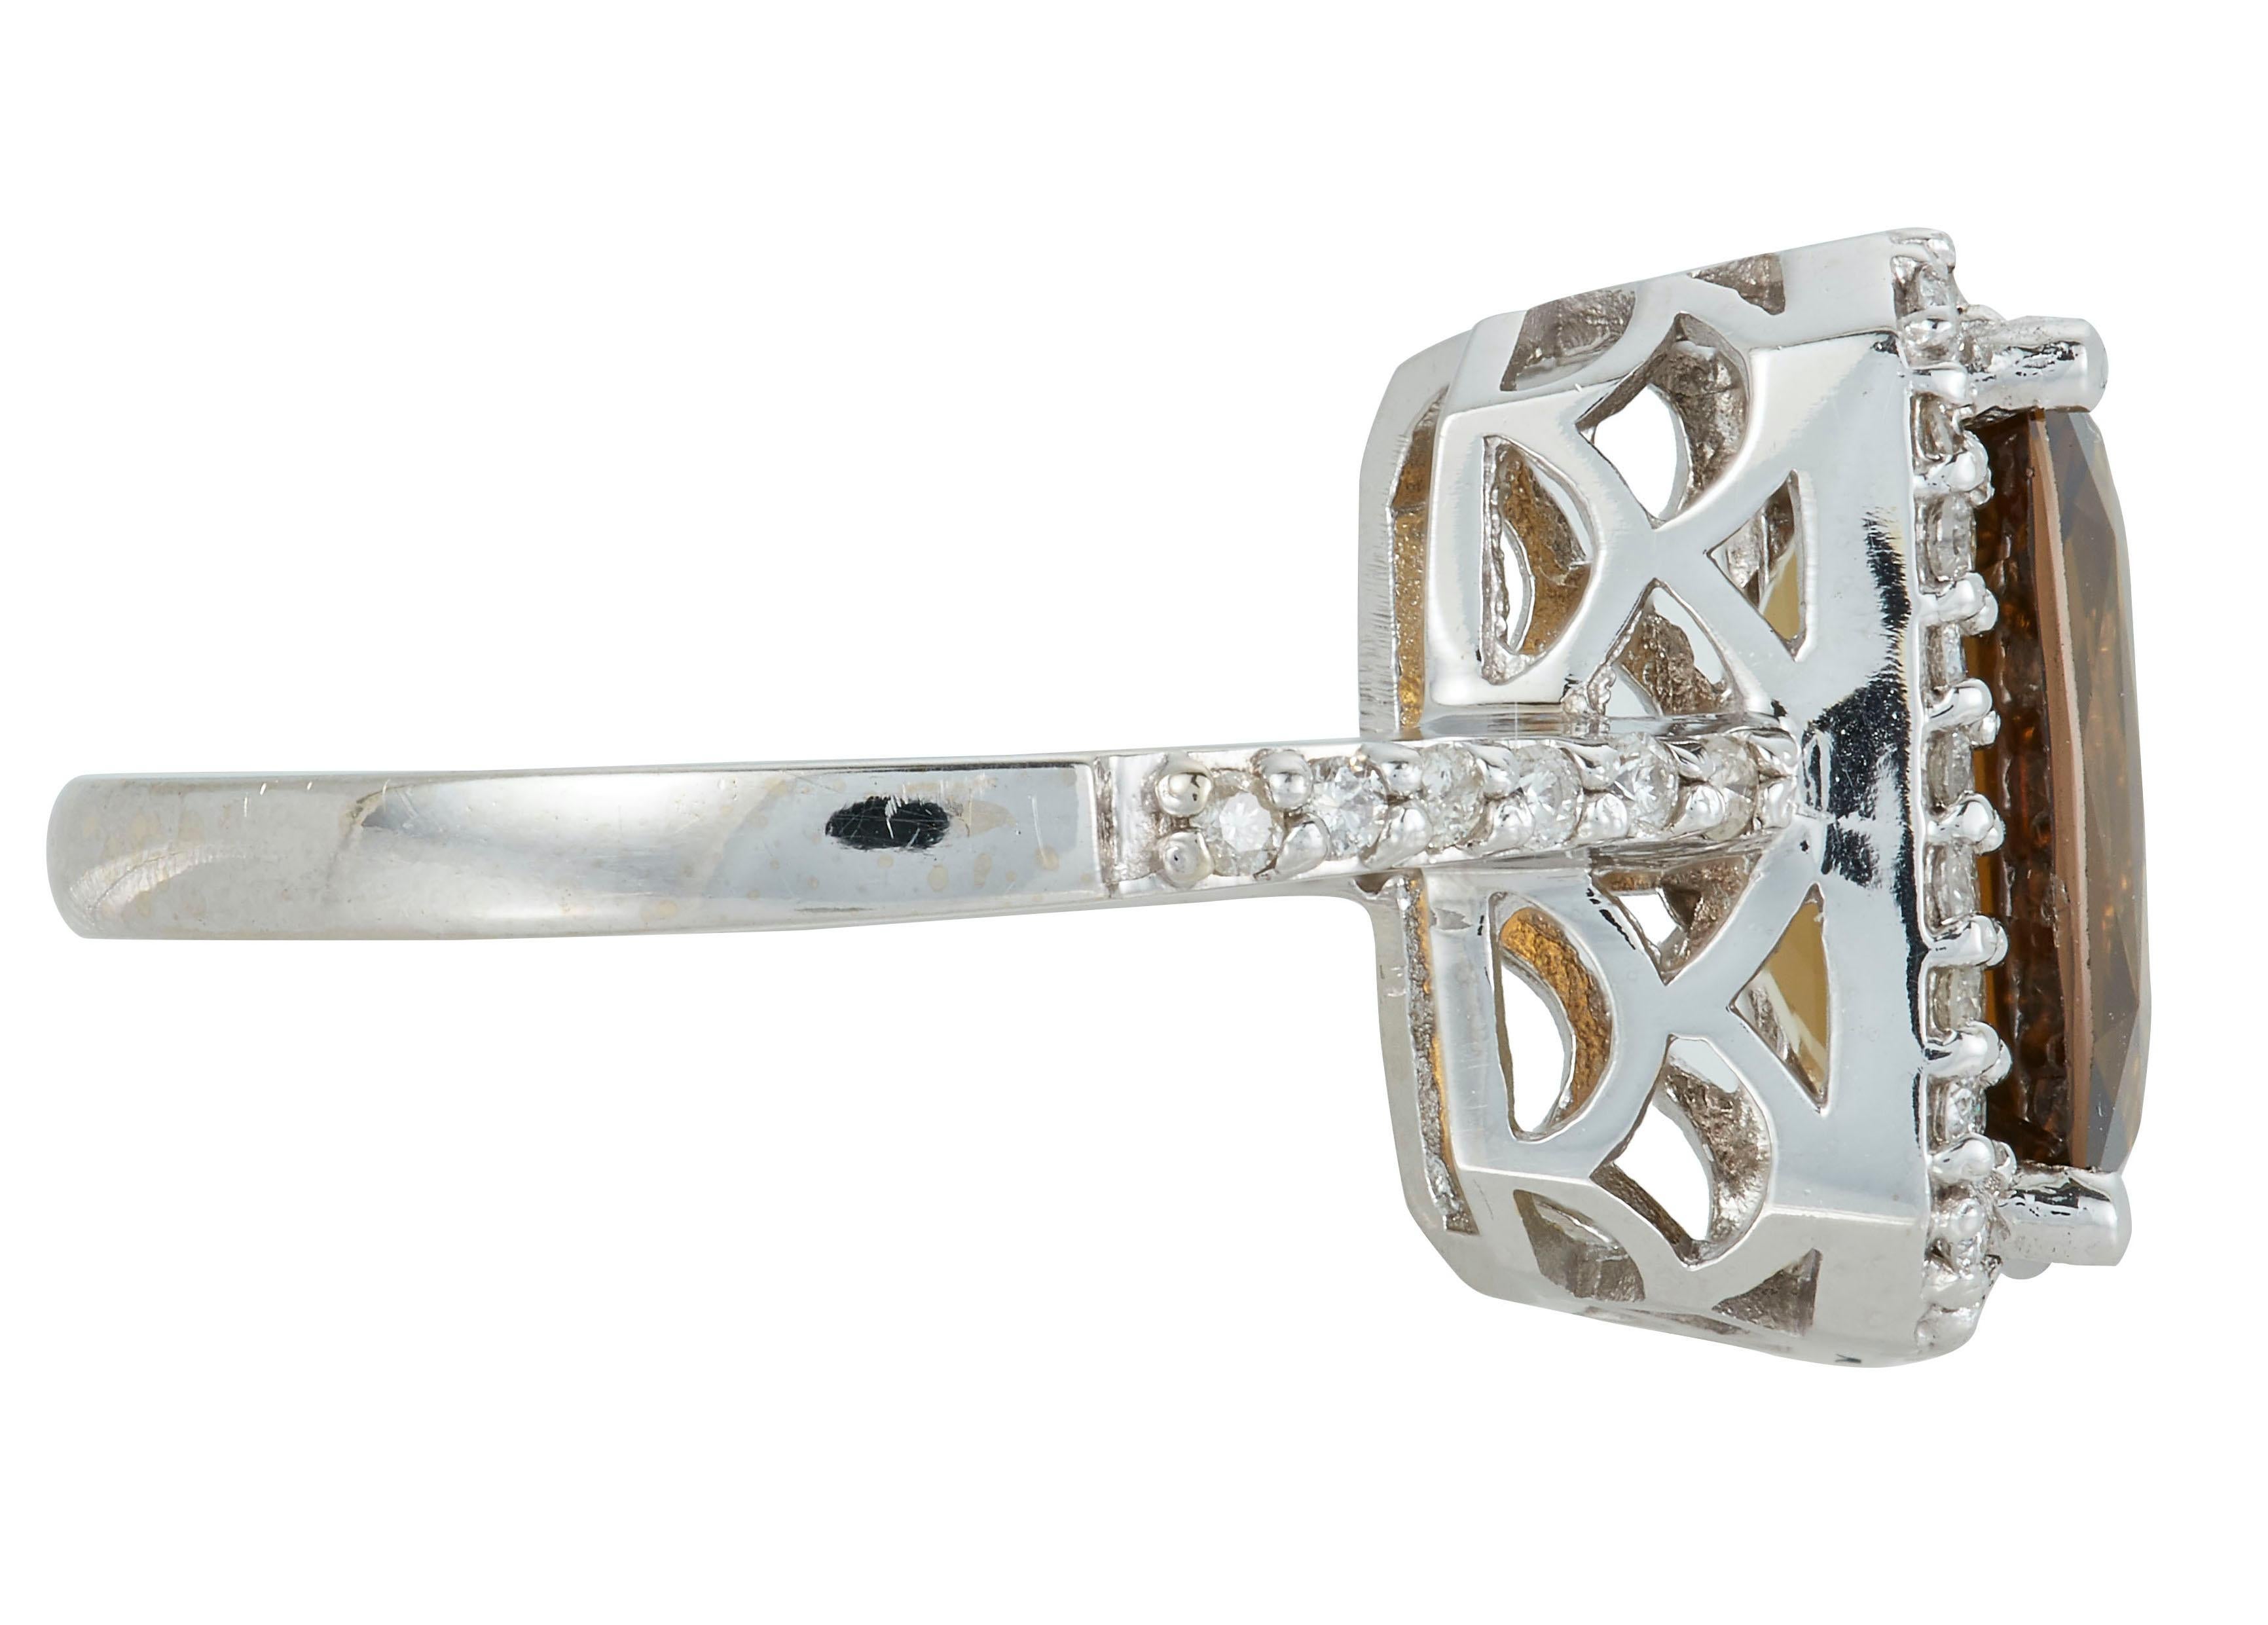 14K White Gold
1 Emerald Cut Chrysoberyl at 5.91 Carats
42 Brilliant Round White Diamonds at 0.42 Carats - Color: H-I /Clarity: SI

Alberto offers complimentary sizing on all rings.

Fine one-of-a-kind craftsmanship meets incredible quality in this